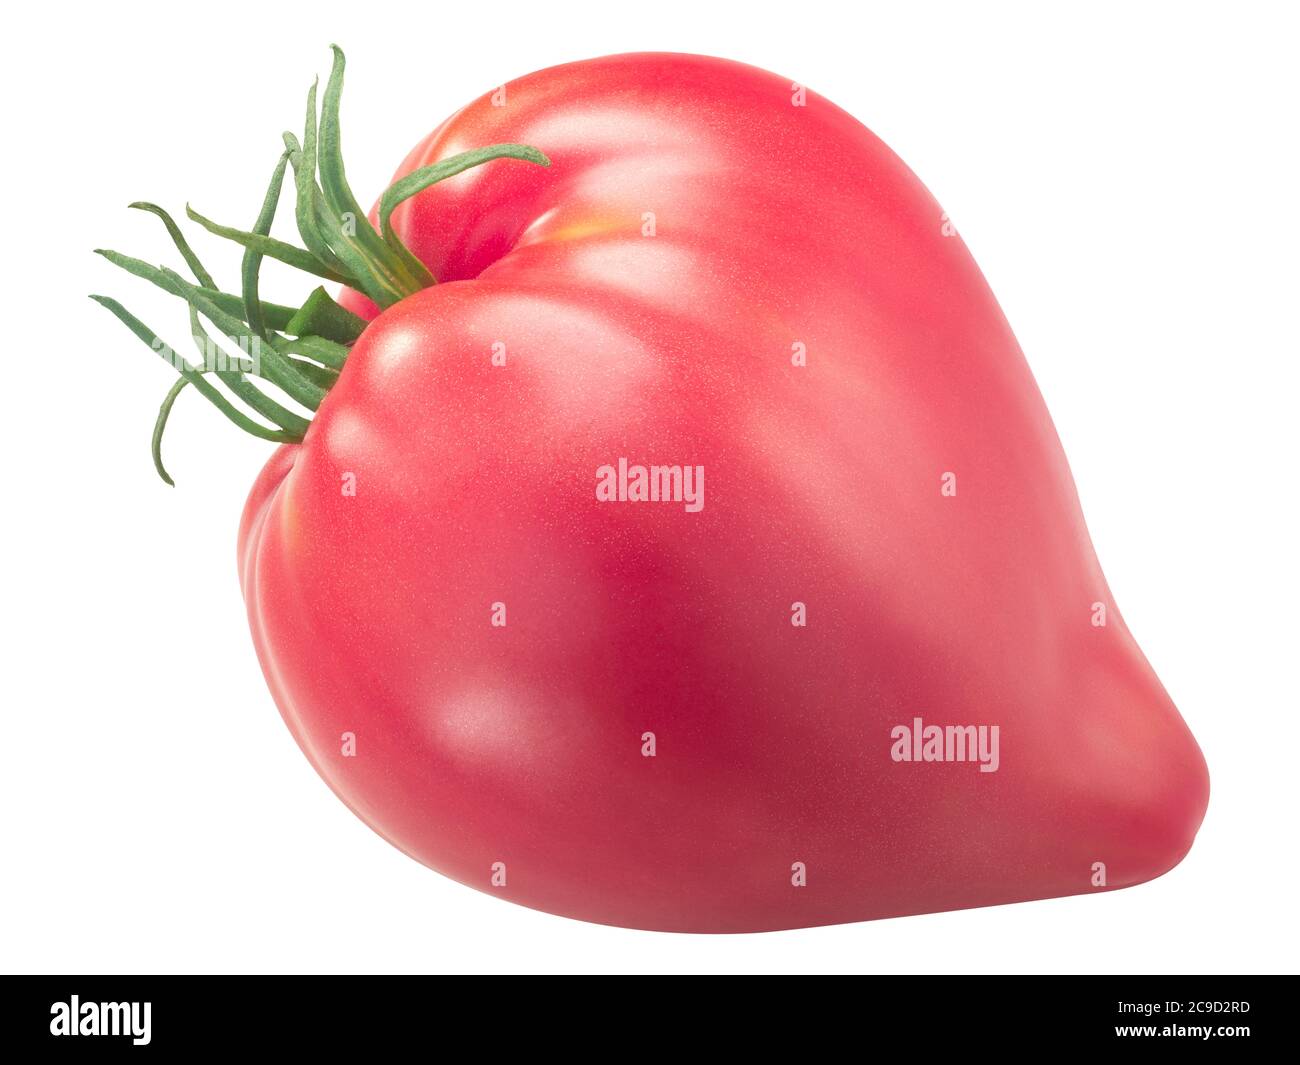 Sterling Old Norway heirloom tomato, pink oxheart type, isolated Stock Photo